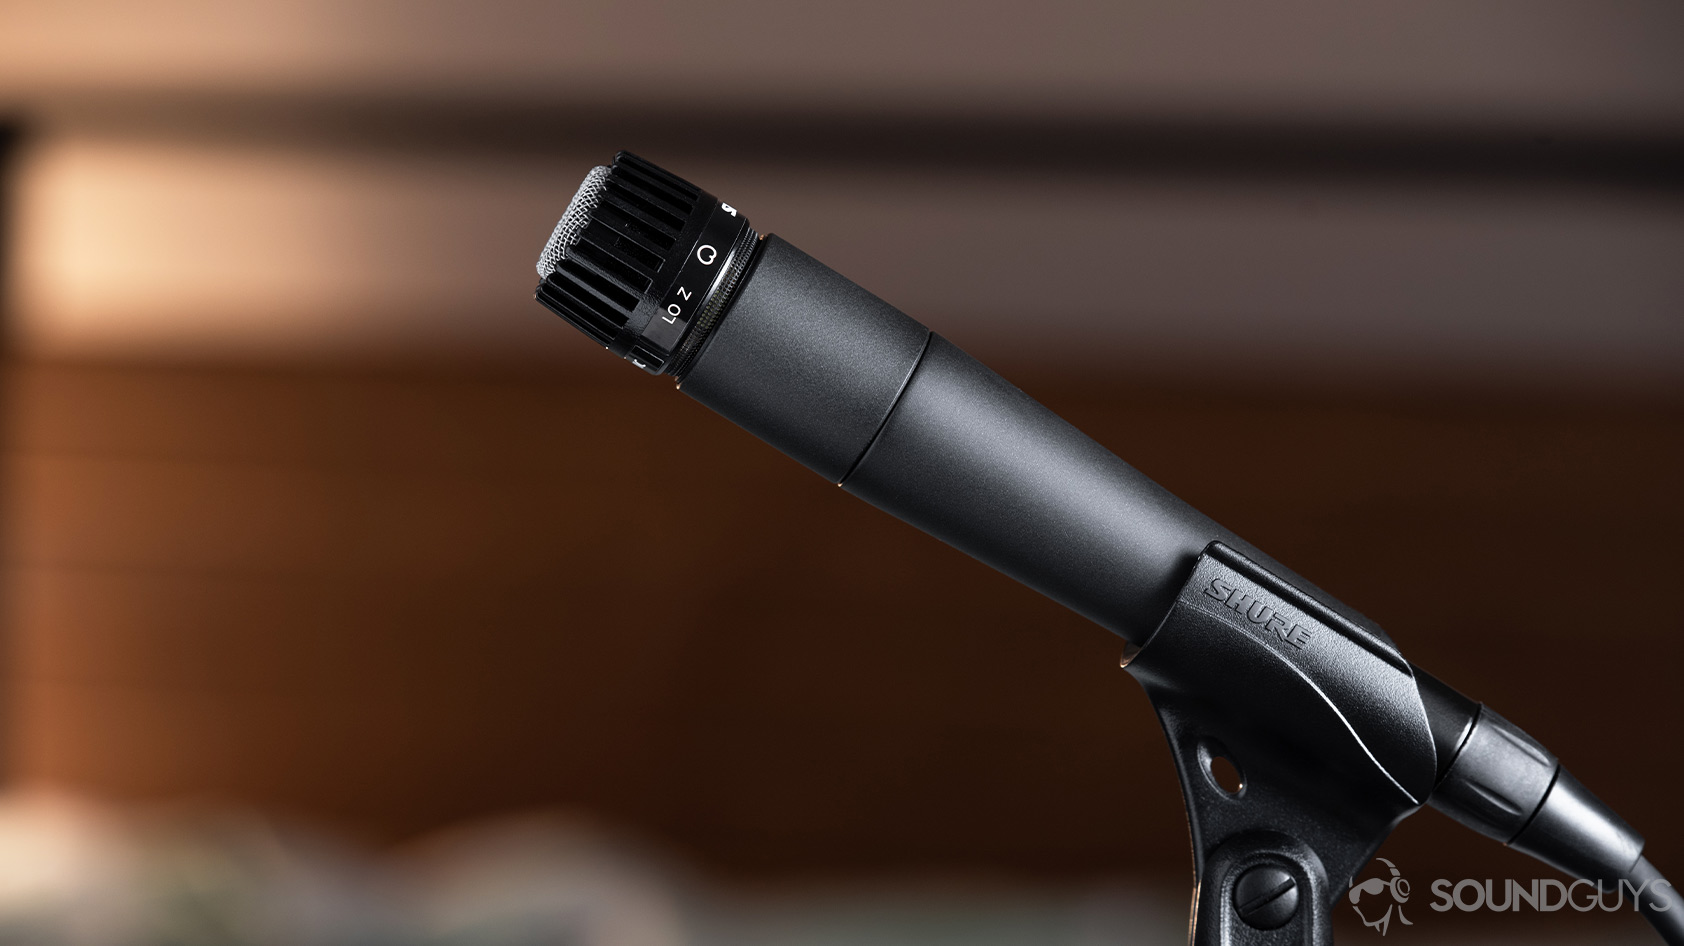 The Shure SM57 XLR microphone in full view, profile image.